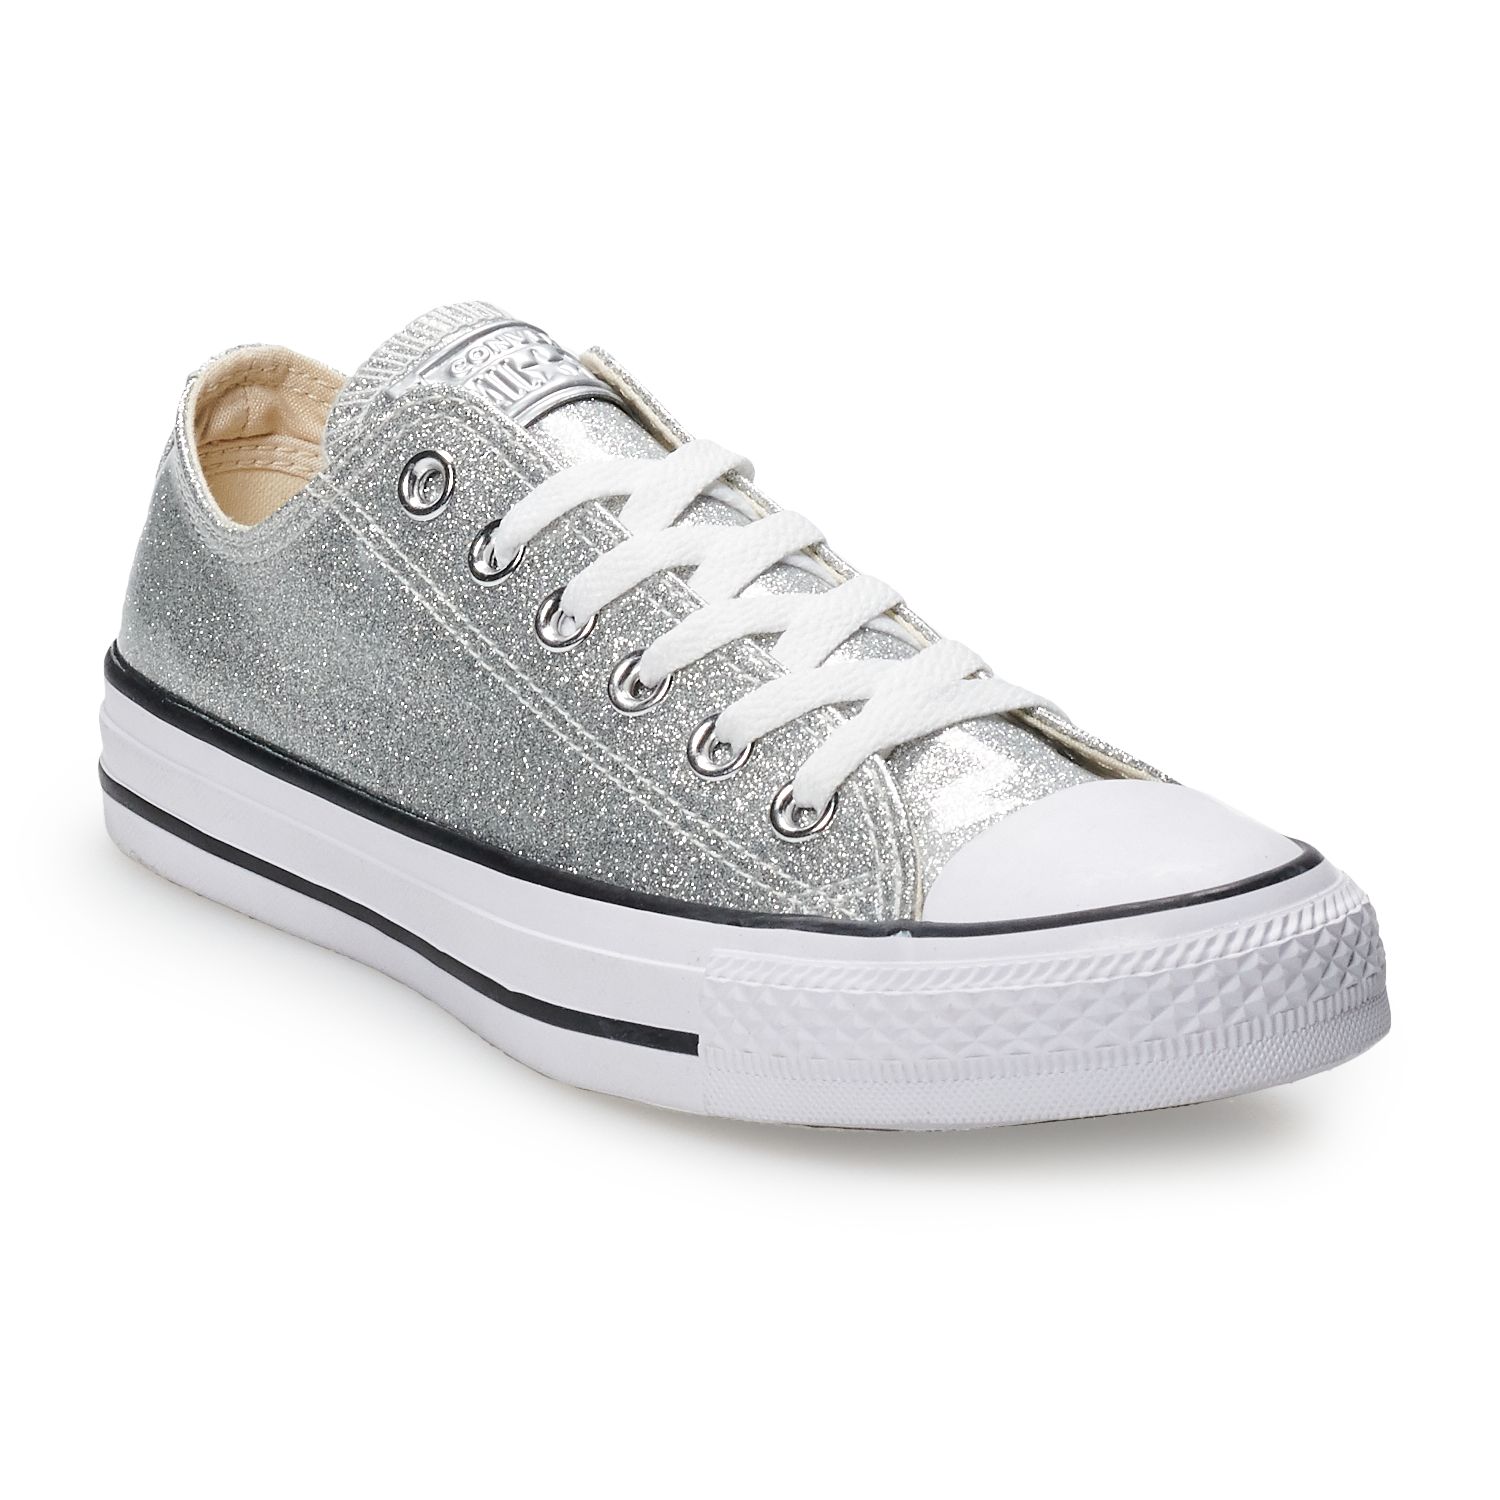 converse sparkle sneakers